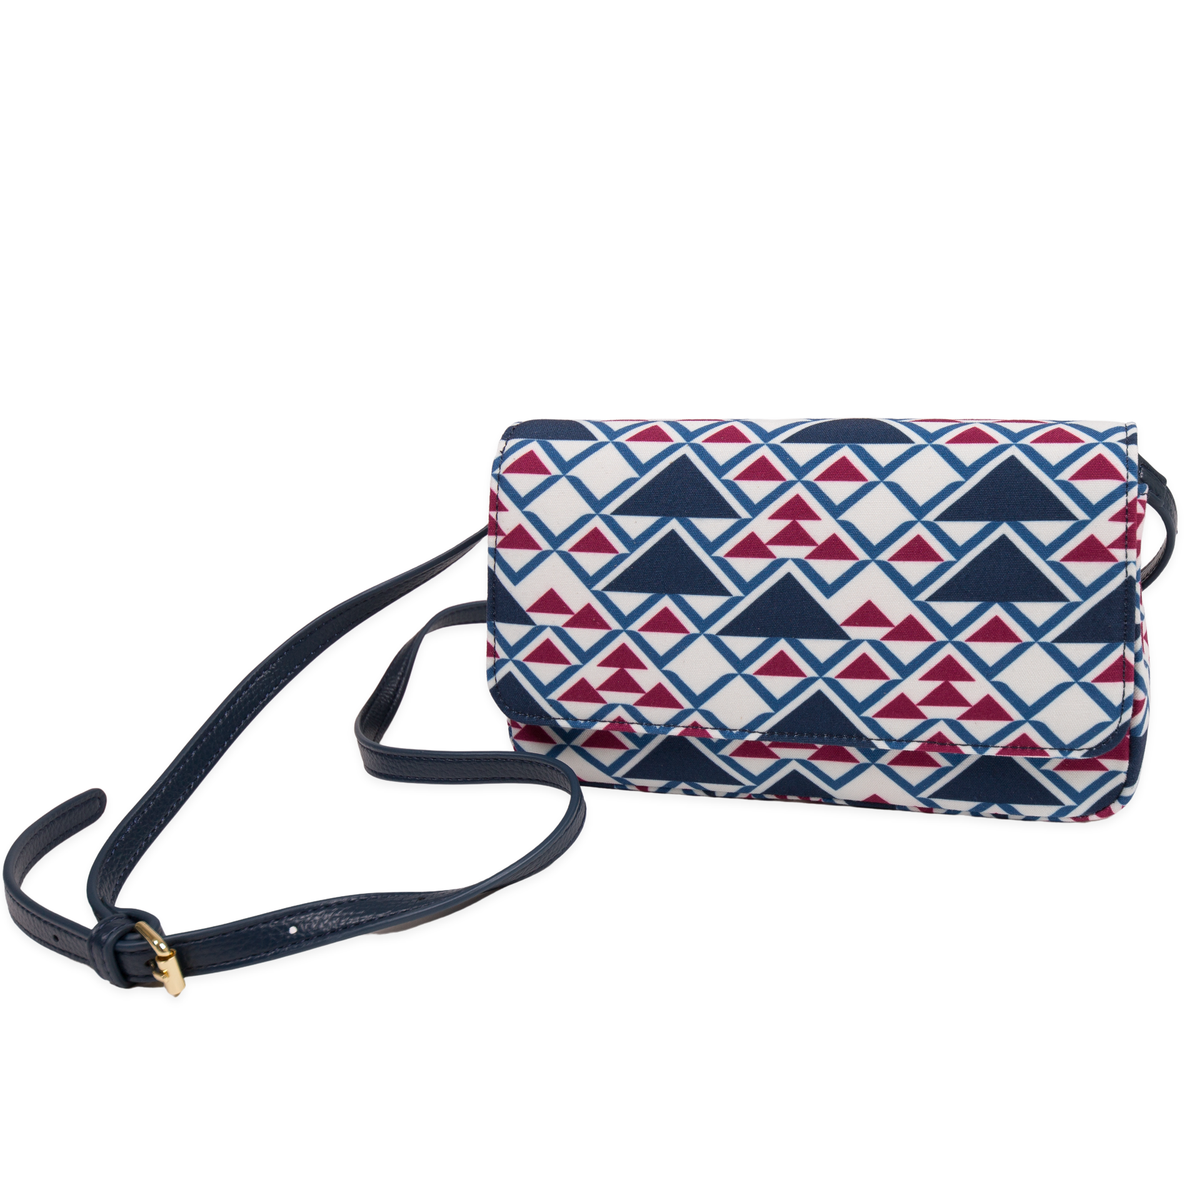 Coastal Peaks Clutch- FREE with purchase over $250.00